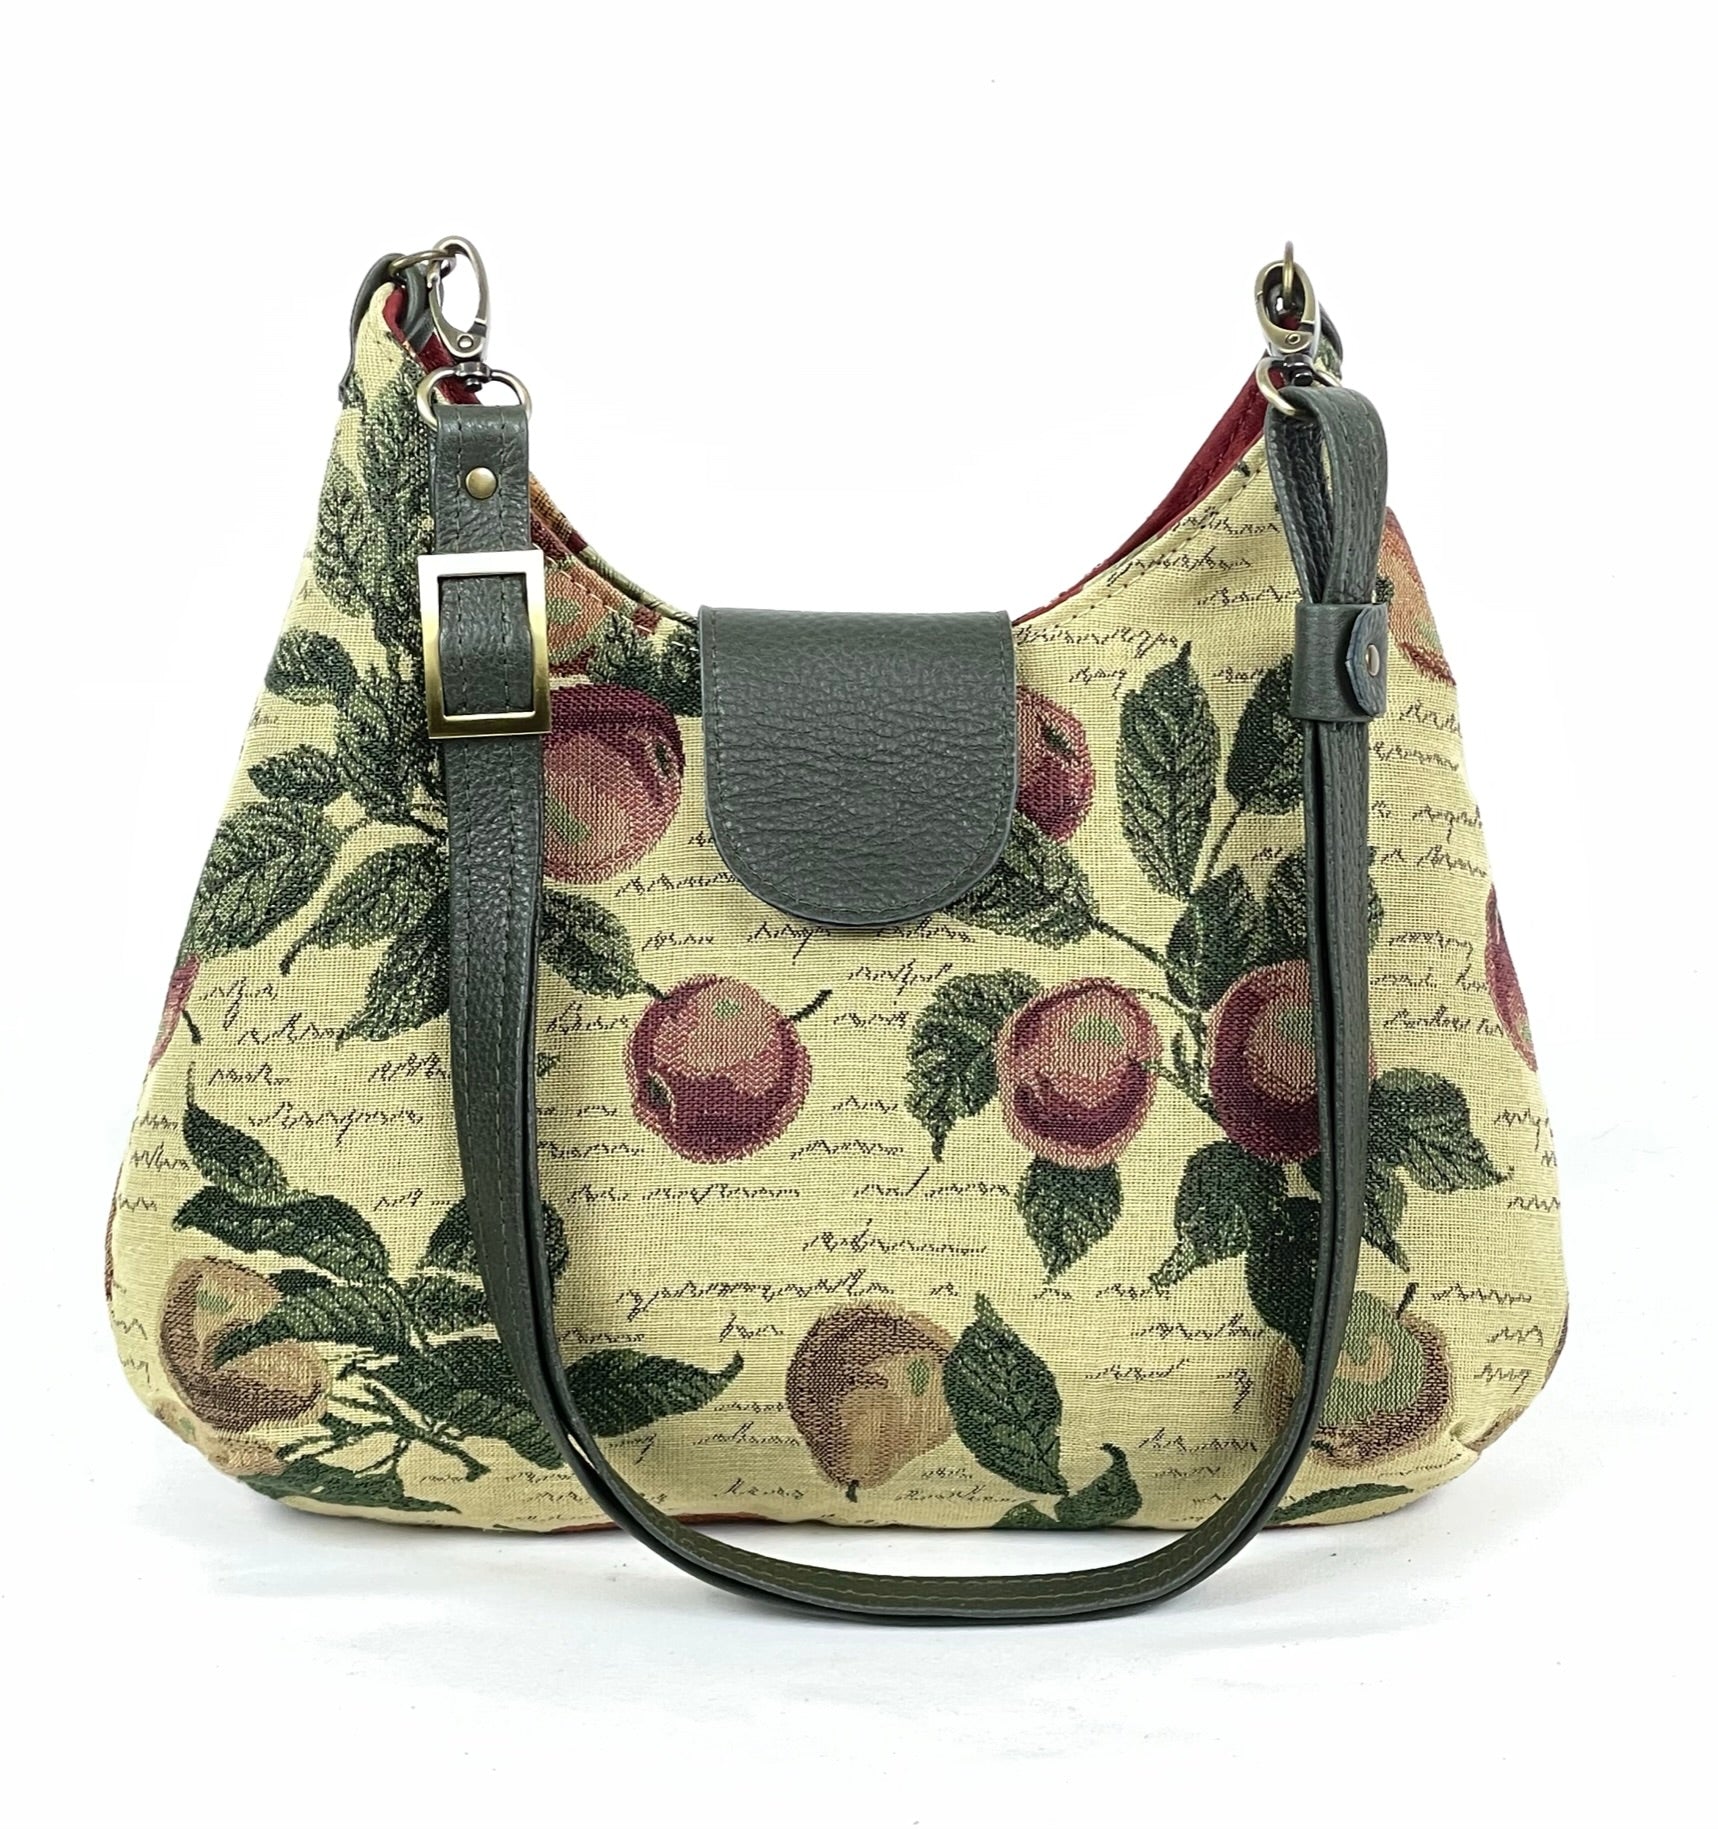 Cottagecore Apples and Pears Hobo Crossbody